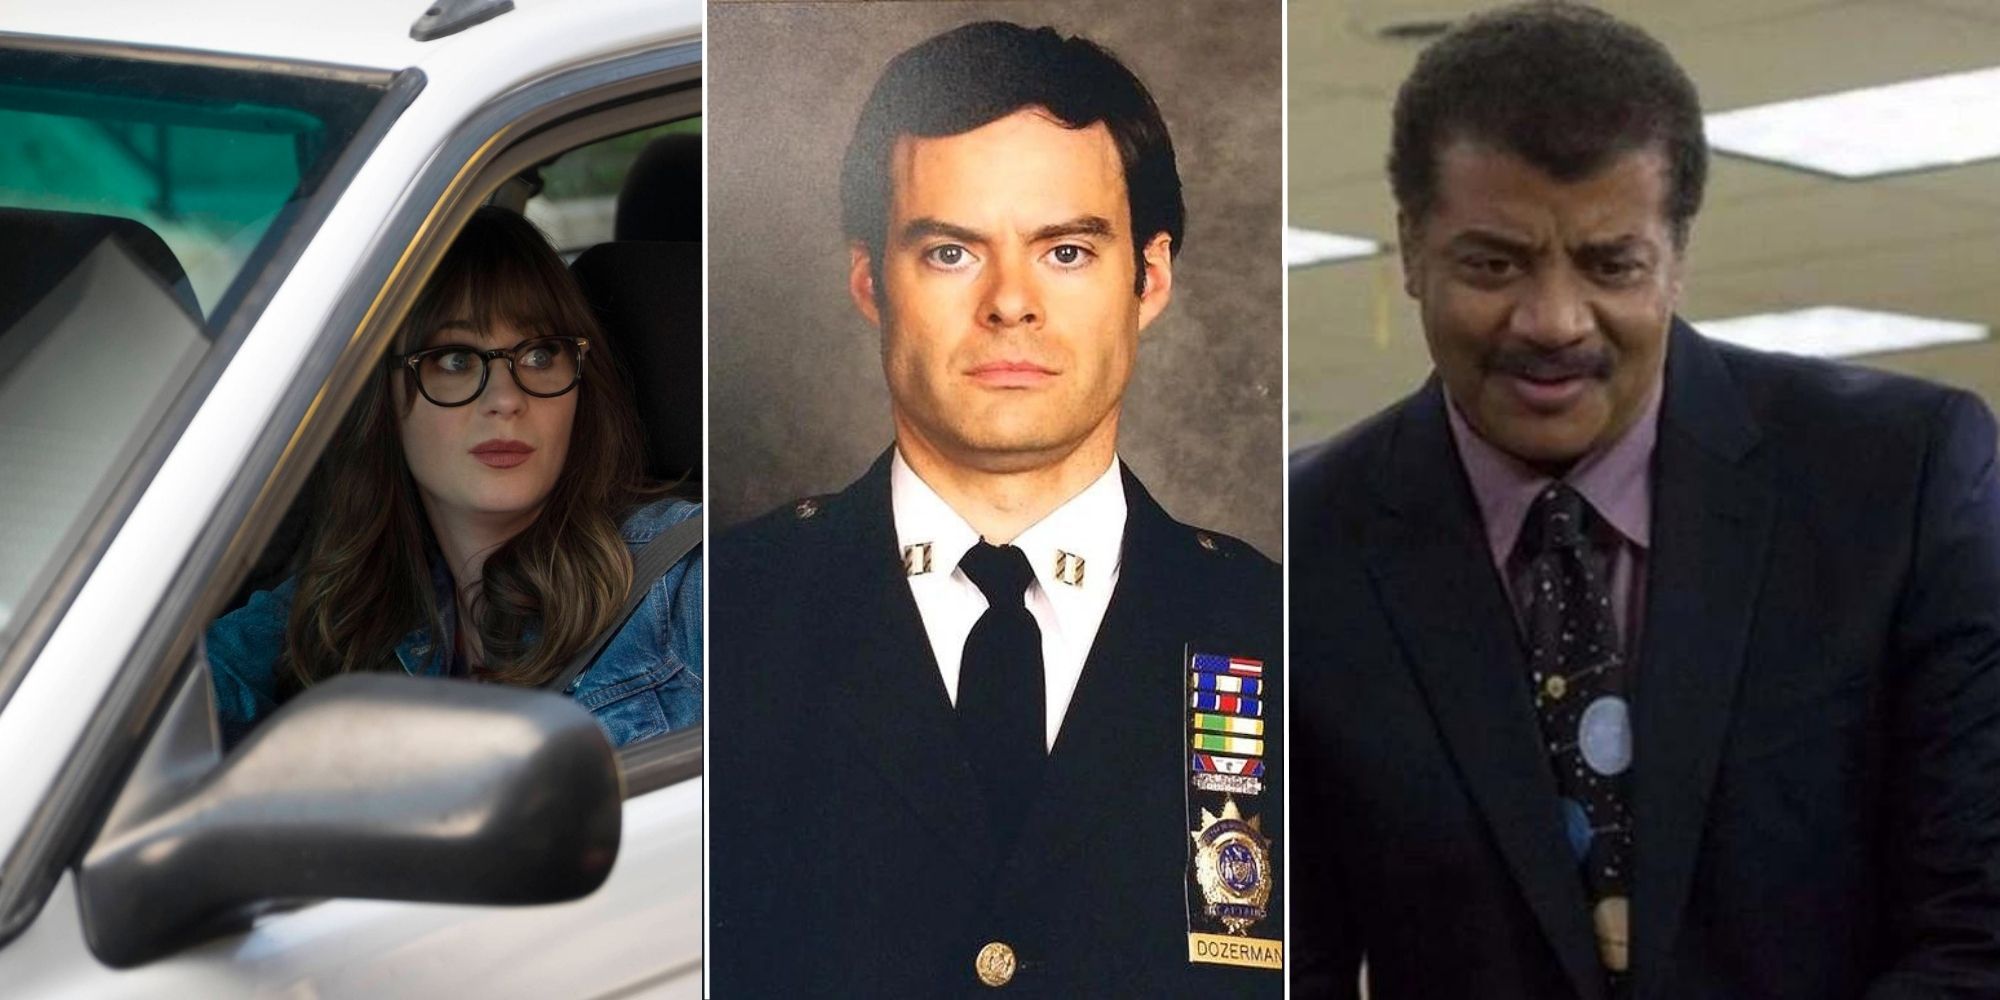 10 Cameos No One Saw Coming On 'Brooklyn Nine-Nine' Featured ImageA collage of Zooey Deschanel, Bill Hader and Neil deGrasse Tysond